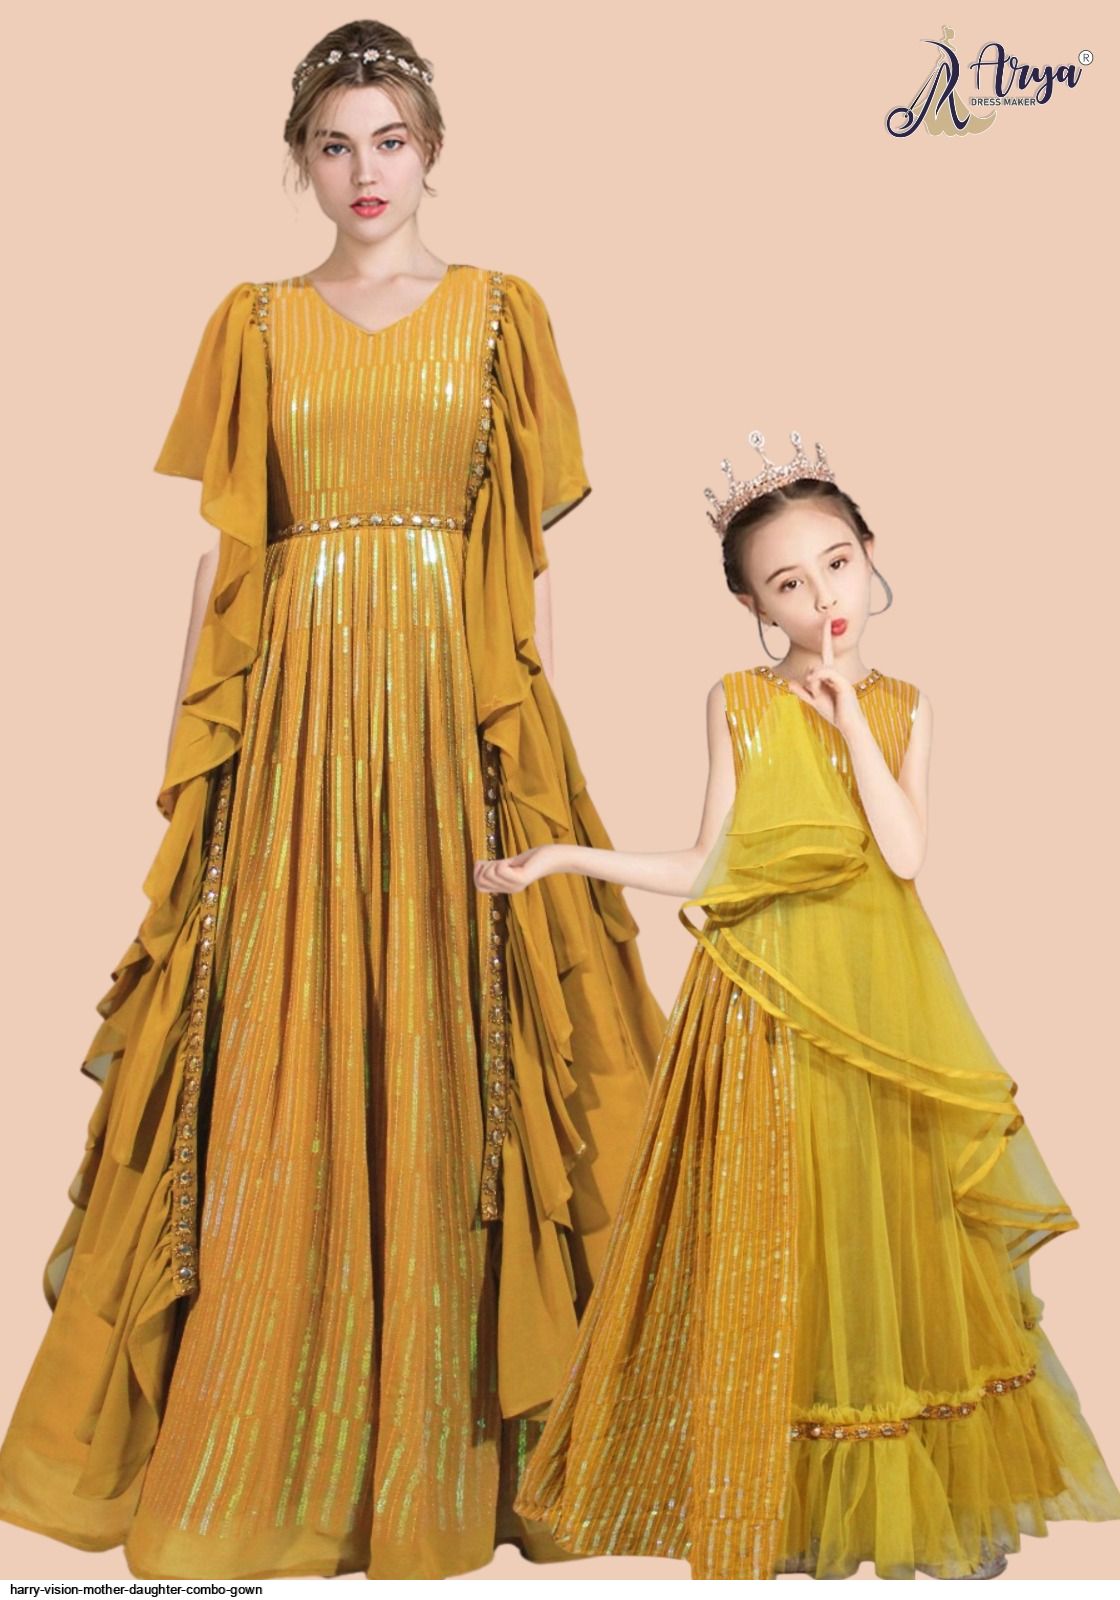 harry vision mother daughter combo gown 465